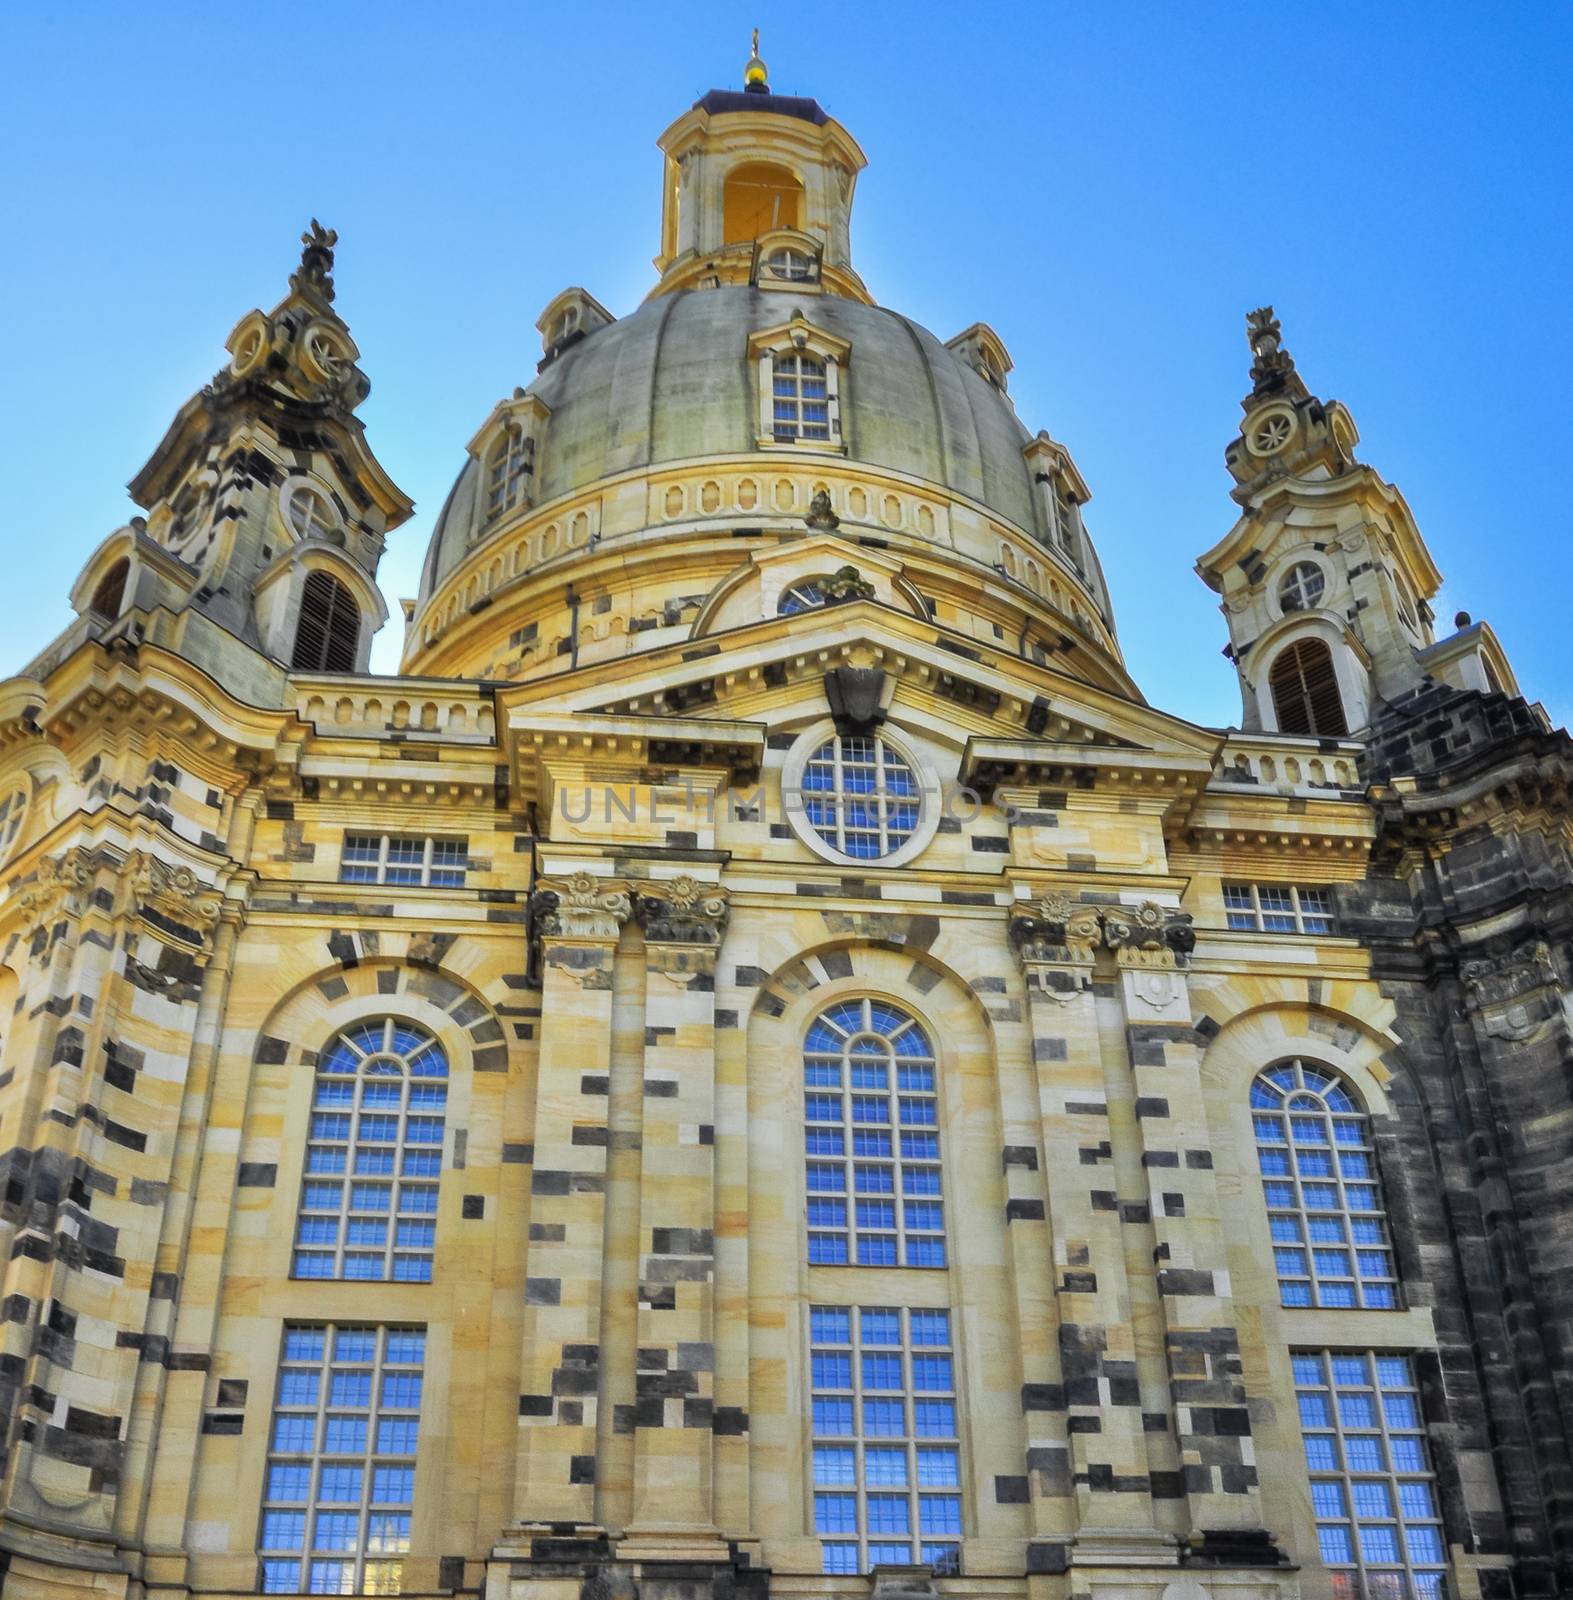 Church Frauenkirche front in Dresden Germany on a sunny day with blue